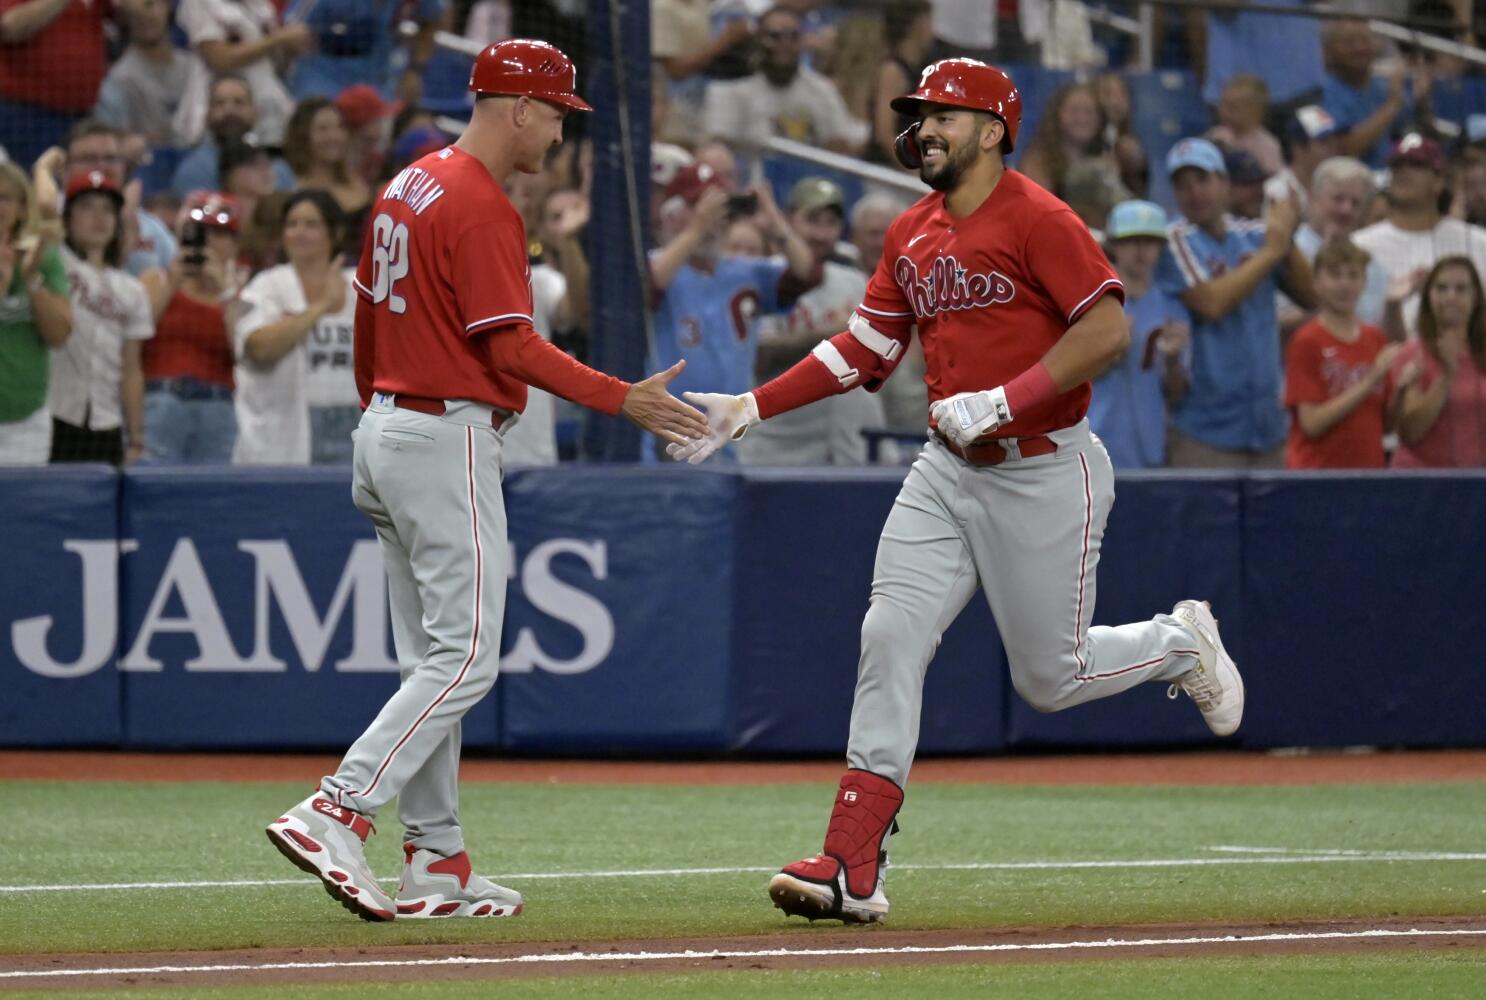 Schwarber, Turner lift Phillies to 3-1 win, send Rays to season